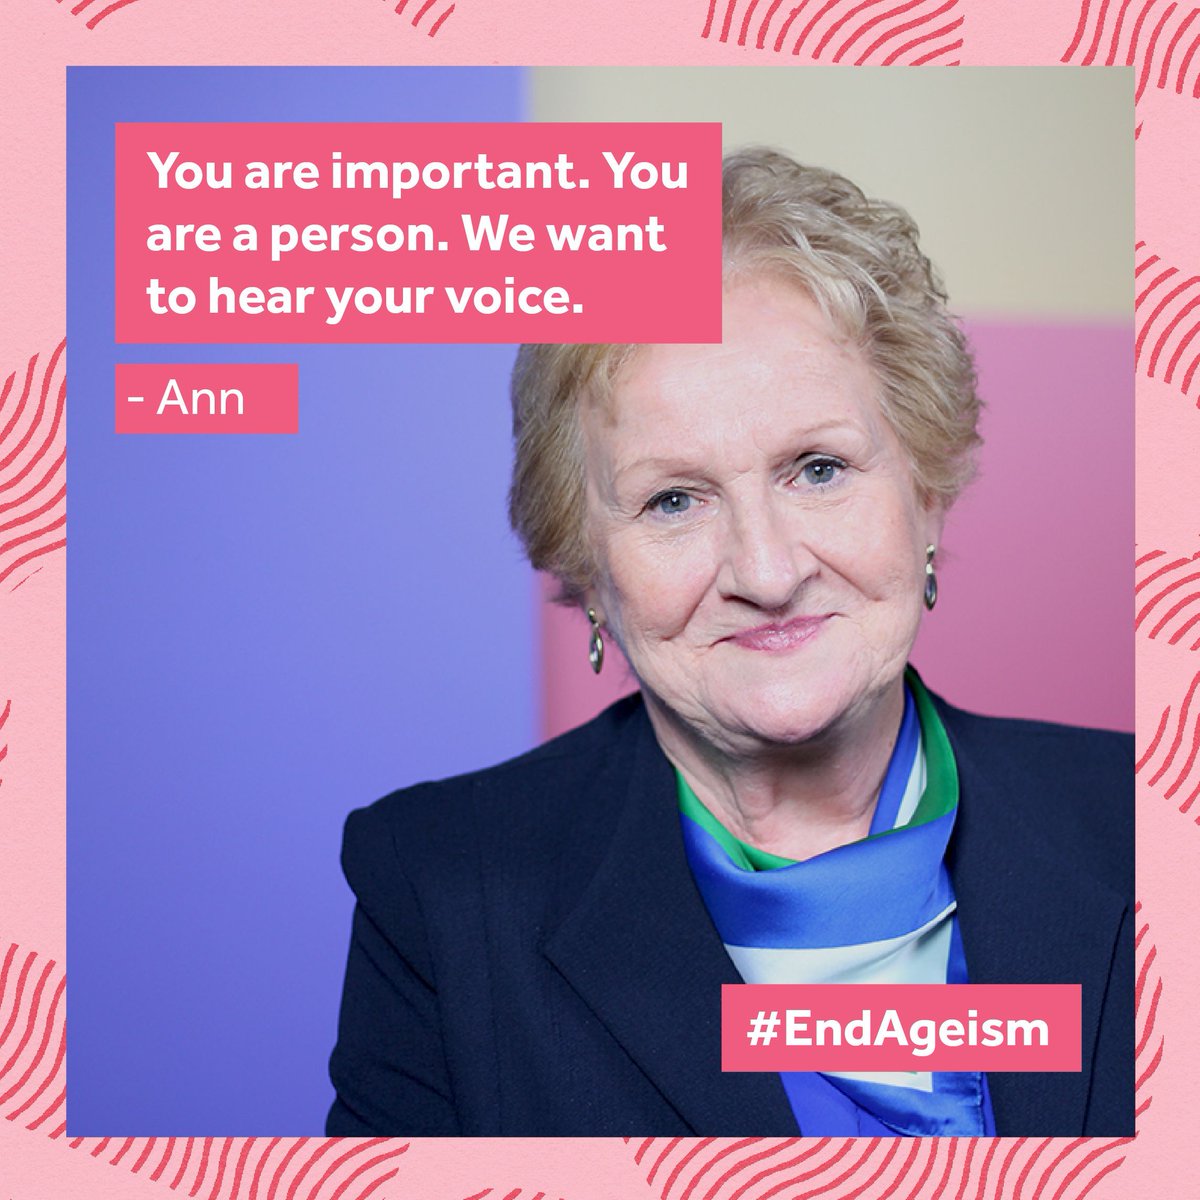 @_IHREC 's #EndAgeism campaign introduces Ann, an advocate with Sage Advocacy, championing the voices of older people. A cause we similarly promote through our BIG Corporate Challenge. Join us in creating a society where every age is valued! Details ➡️buff.ly/48S7c8e.